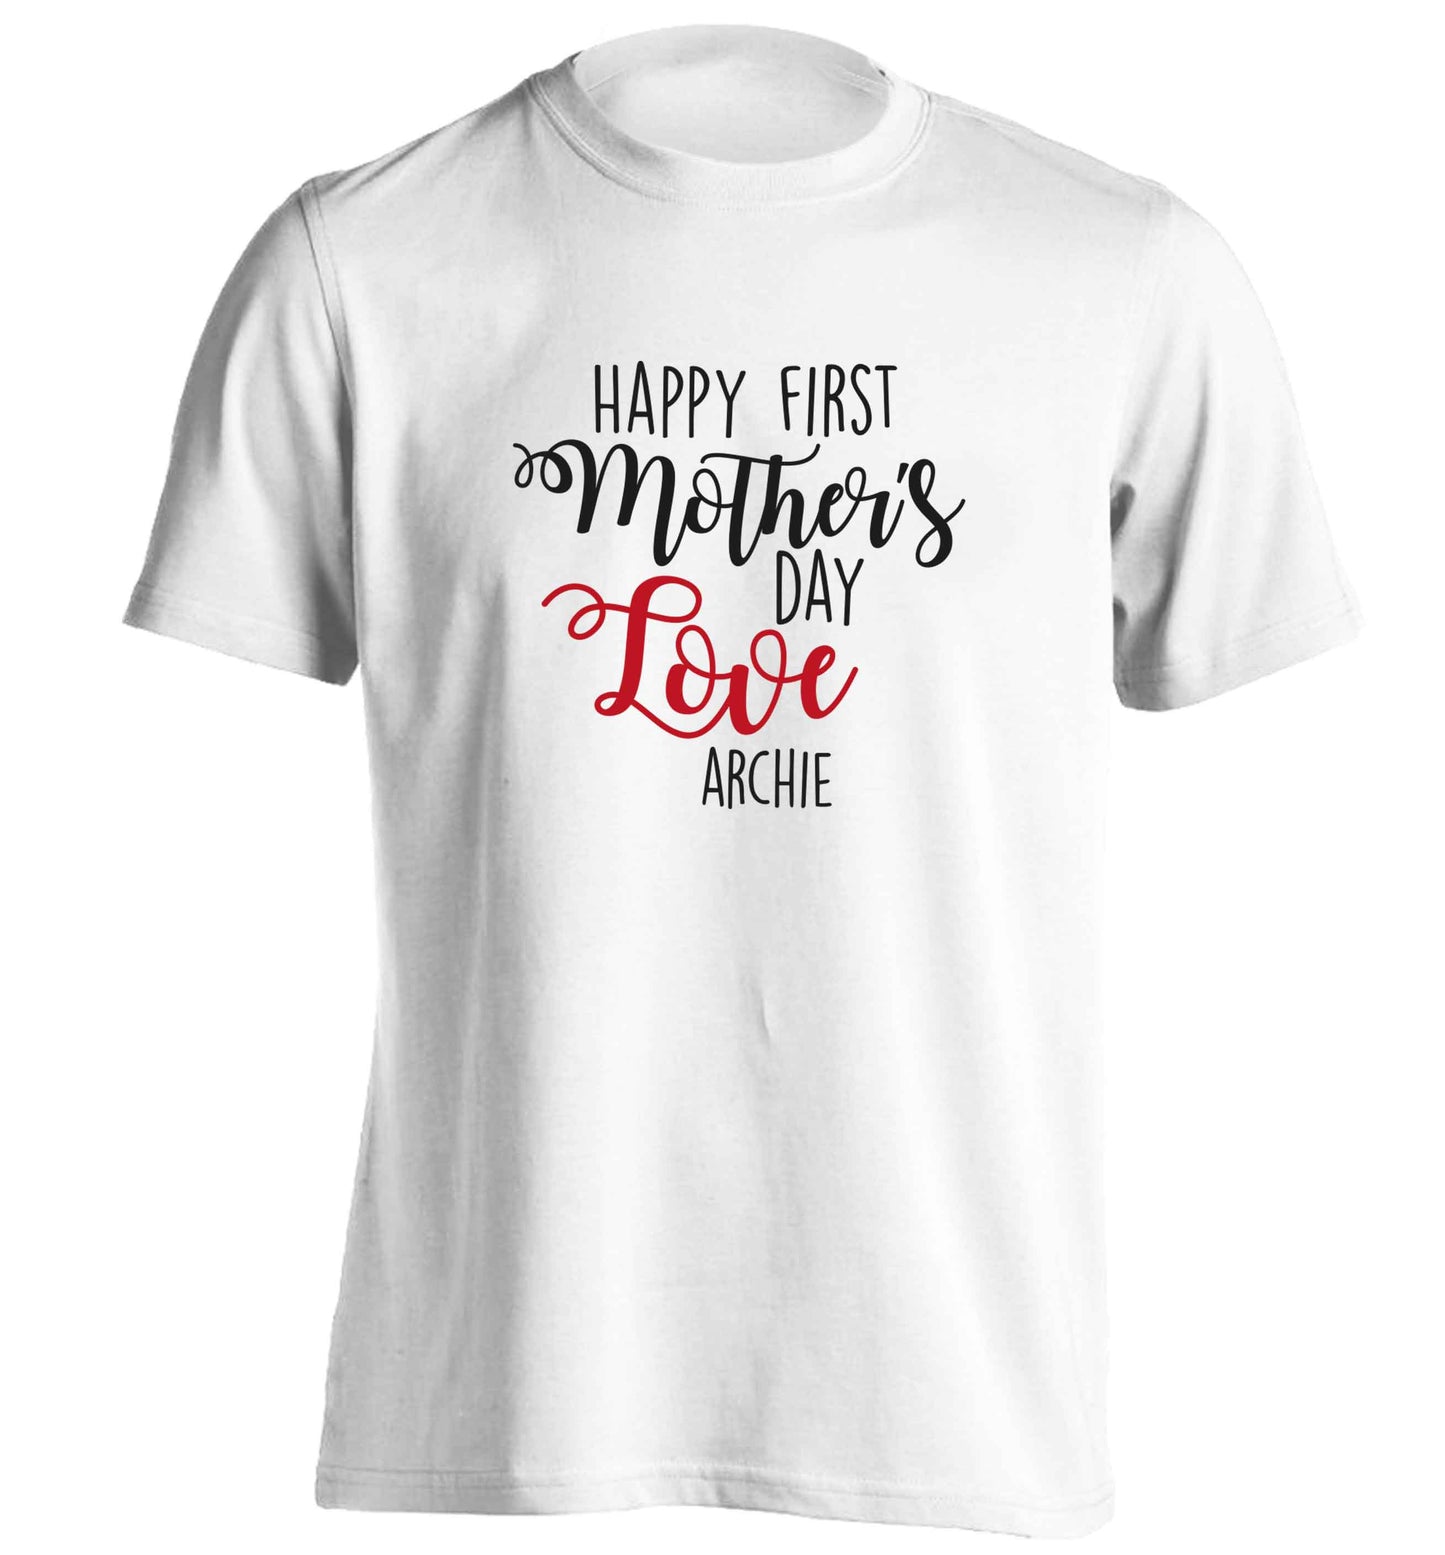 Mummy's first mother's day! adults unisex white Tshirt 2XL